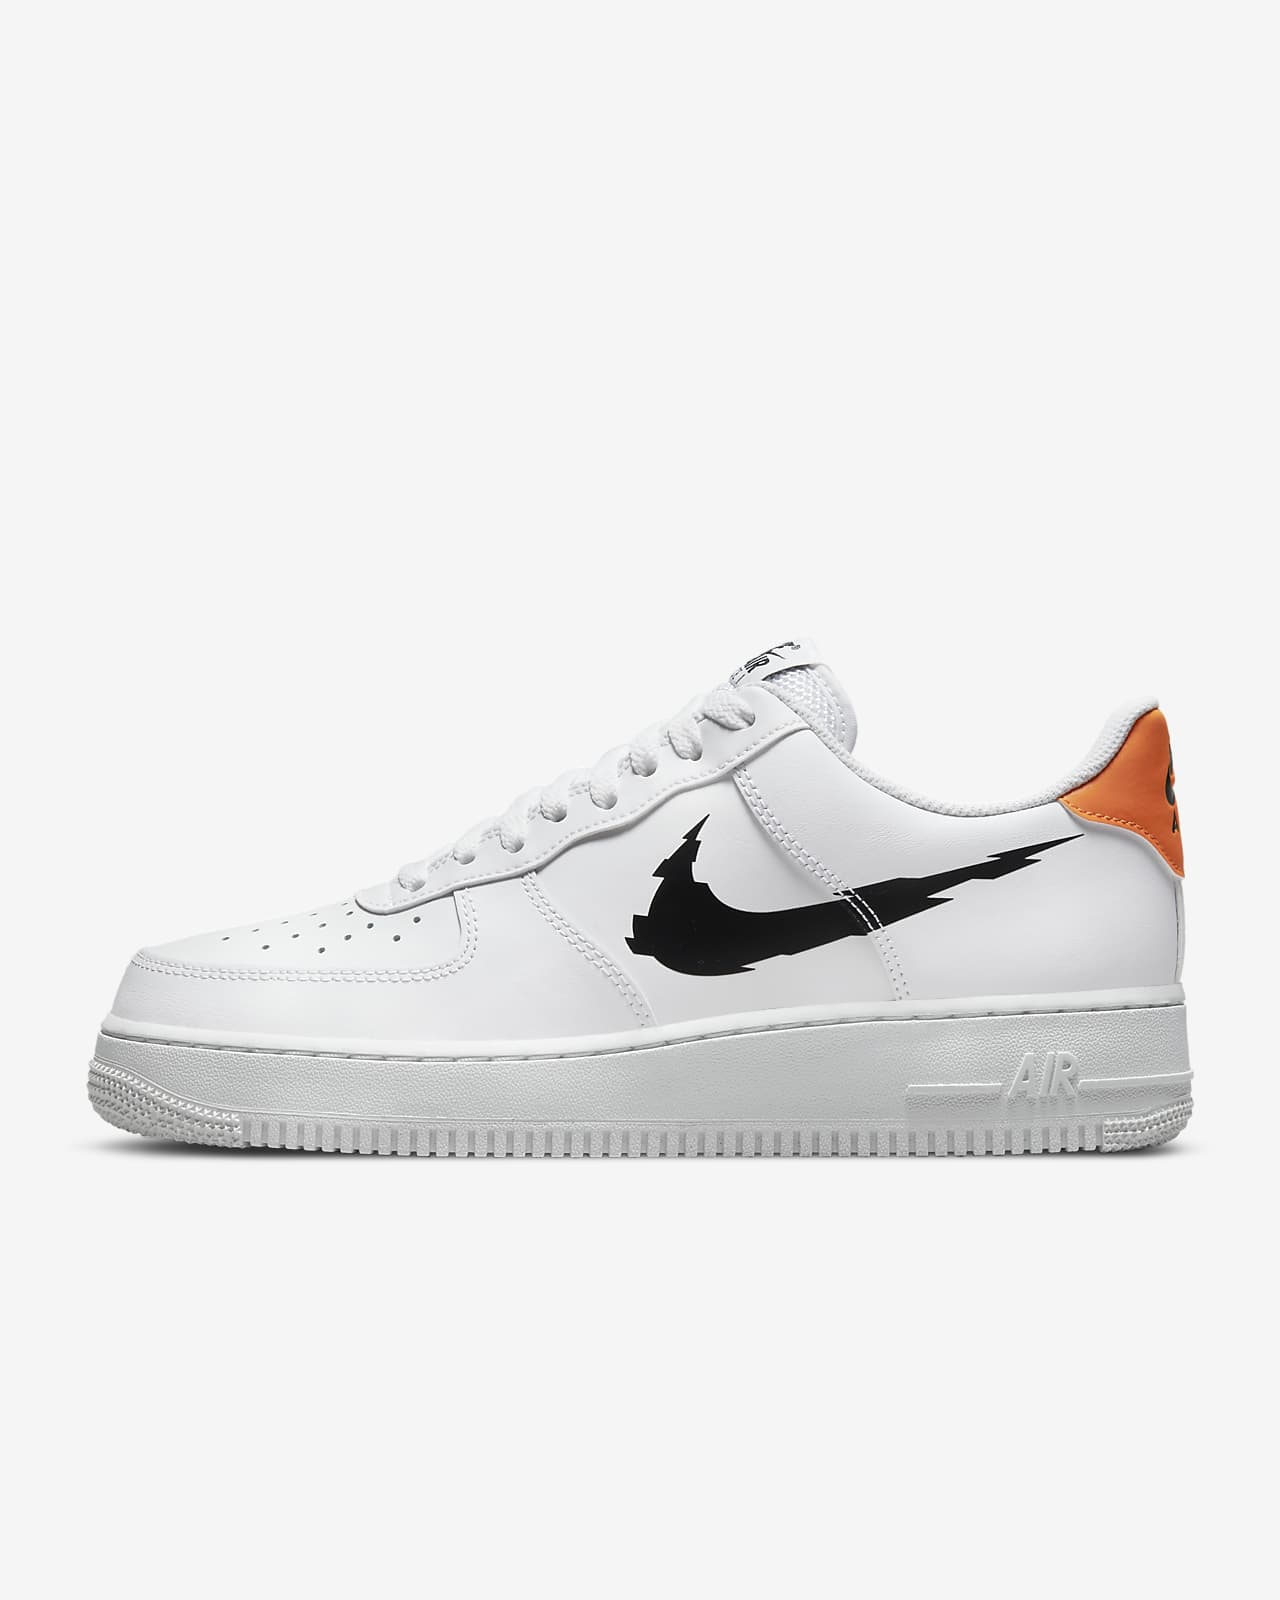 Nike Air Force 1 '07 Men's Shoes بايسون